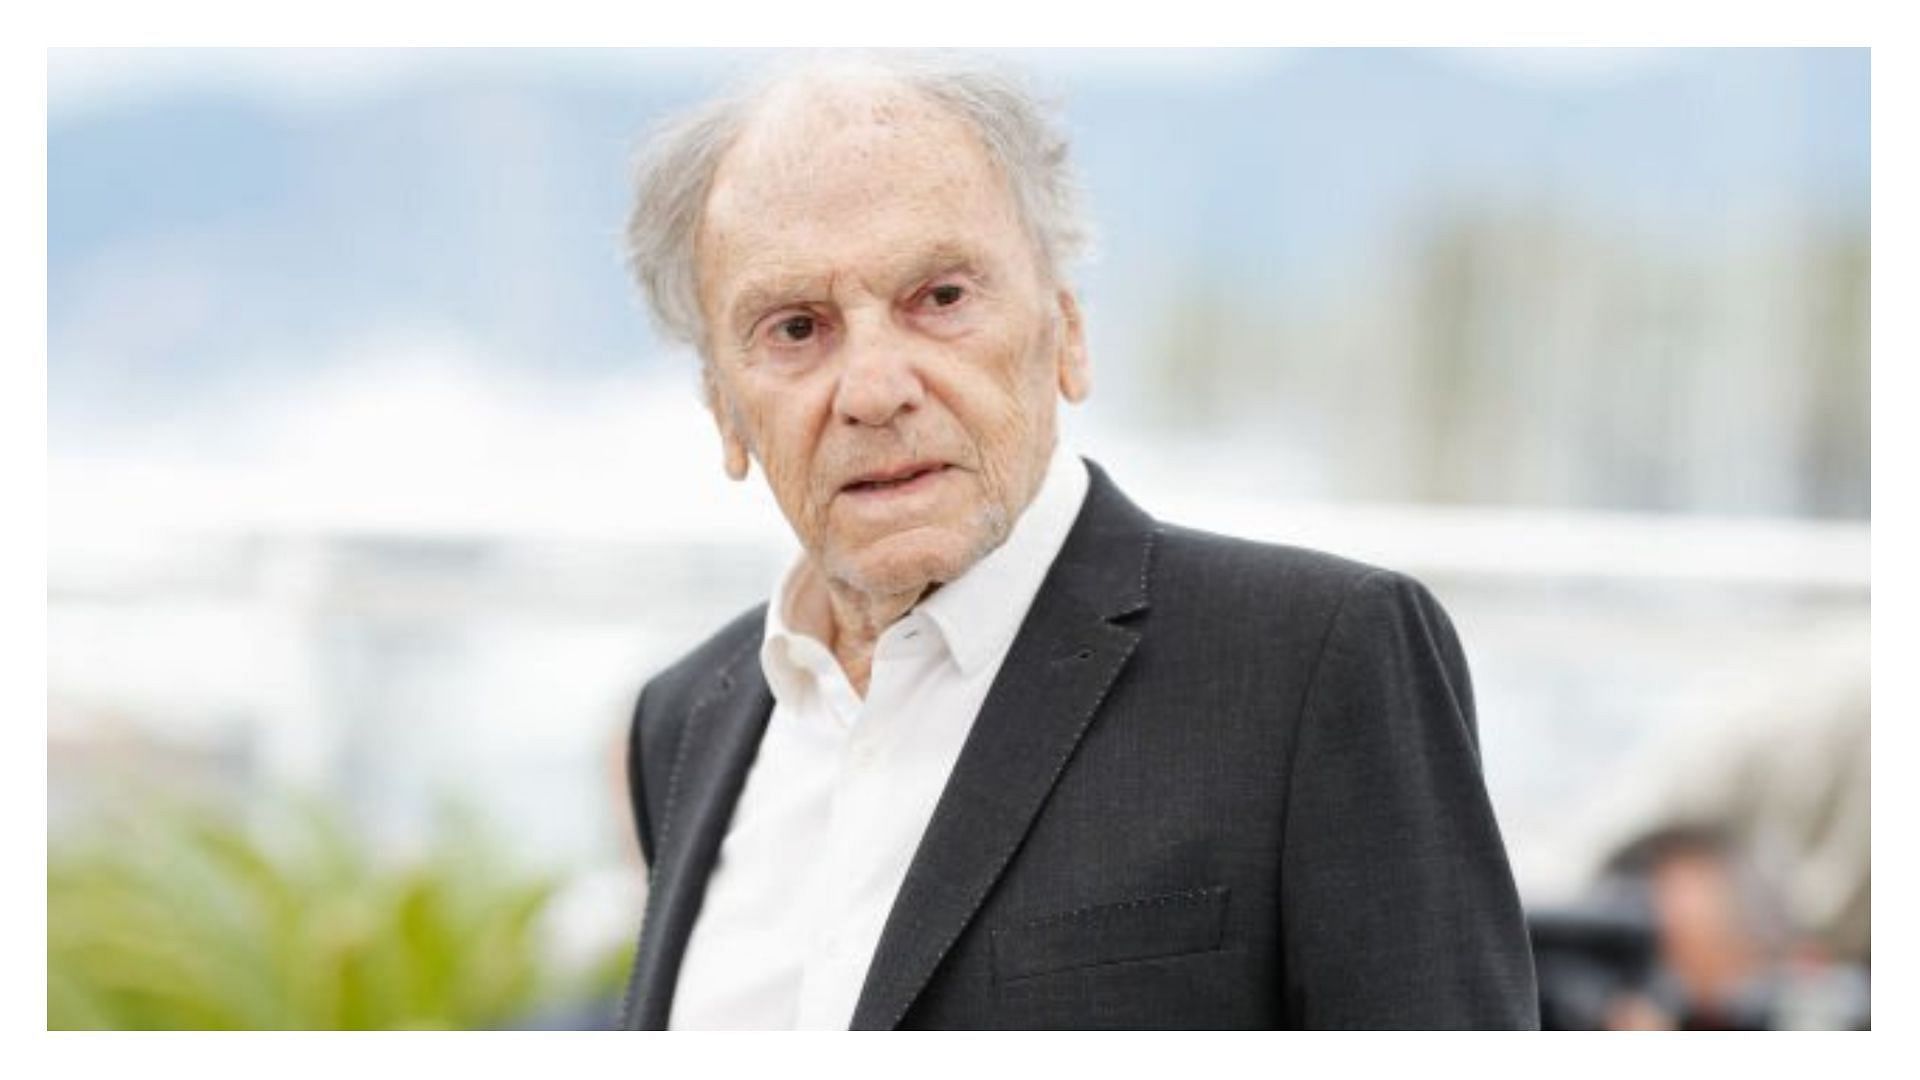 Jean-Louis Trintignant appeared in several French and English films (Image via Andreas Rentz/Getty Images)